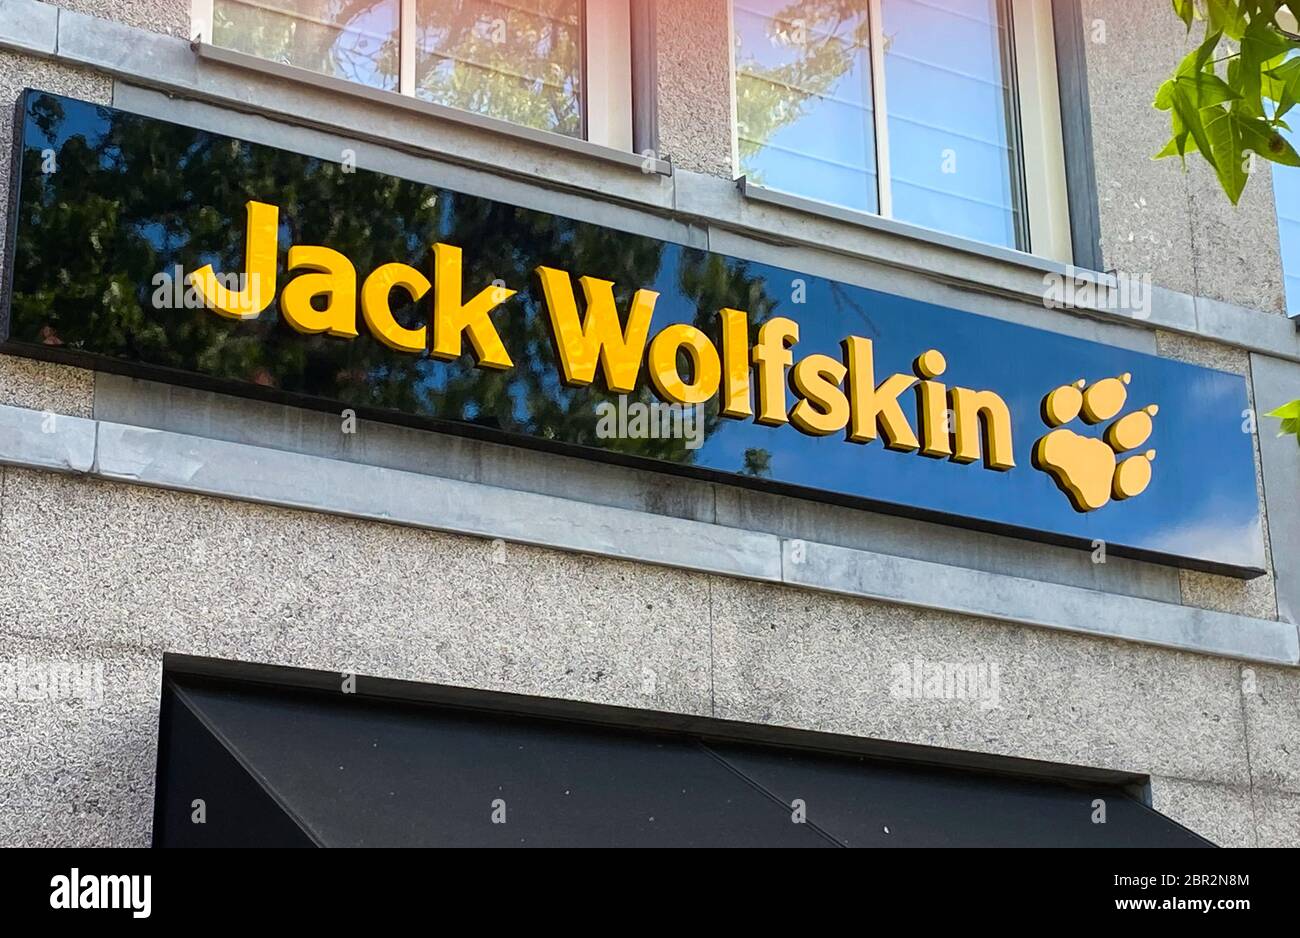 Jack Wolfskin High Resolution Stock Photography and Images - Alamy